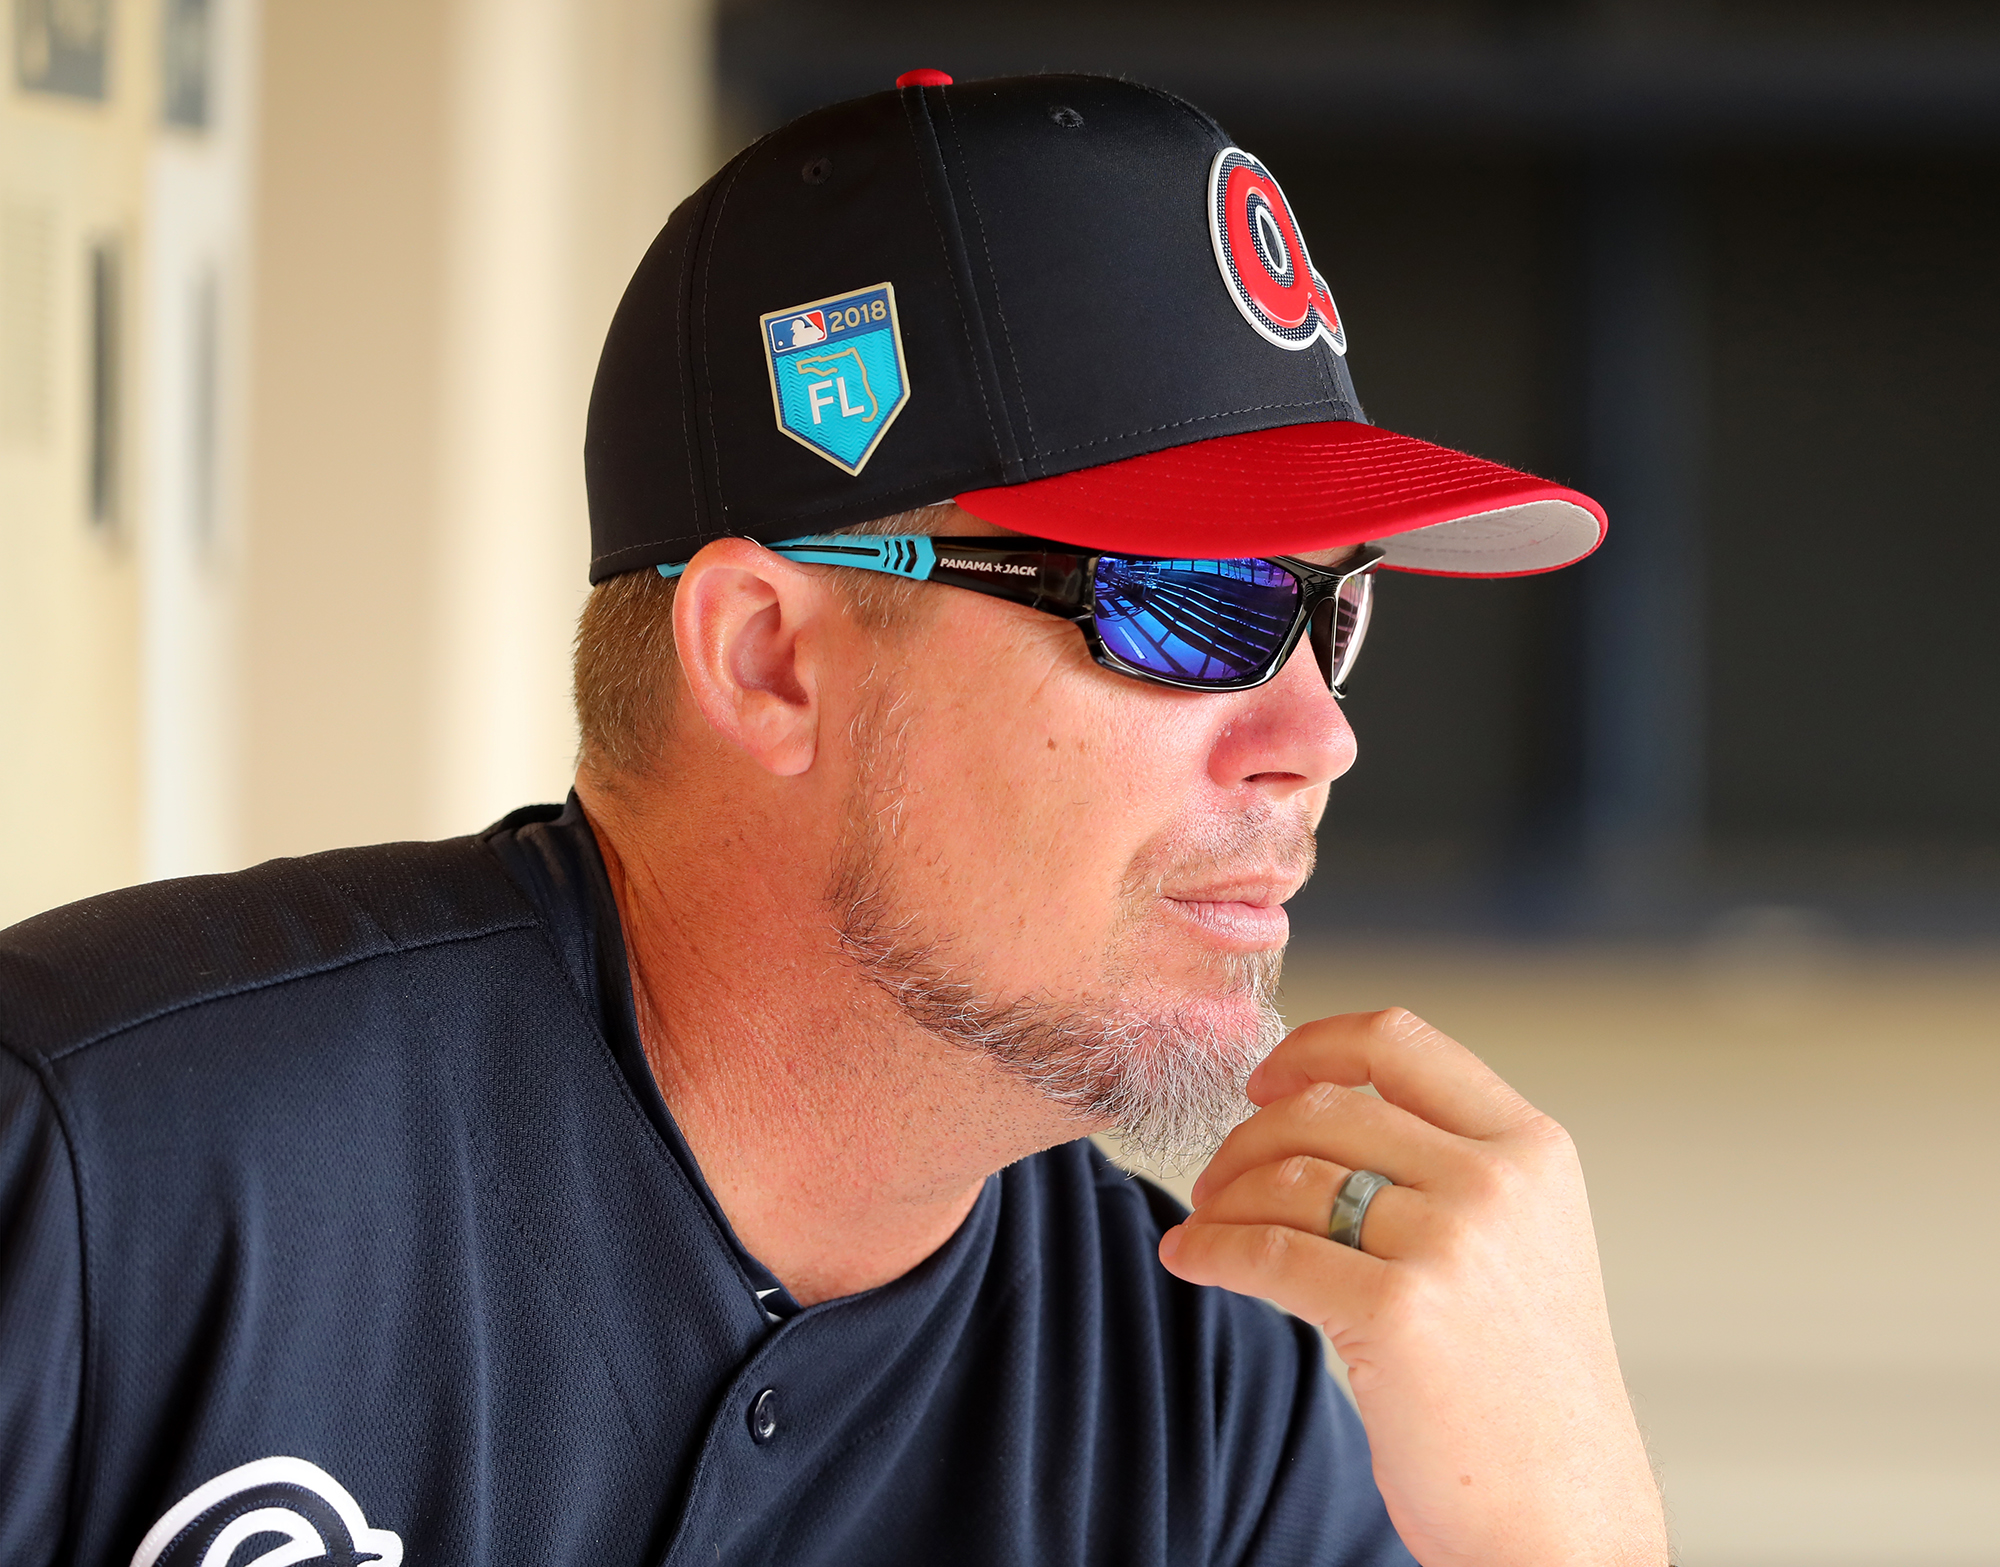 Legacy Man: 10 fun facts about Chipper Jones' HOF career with